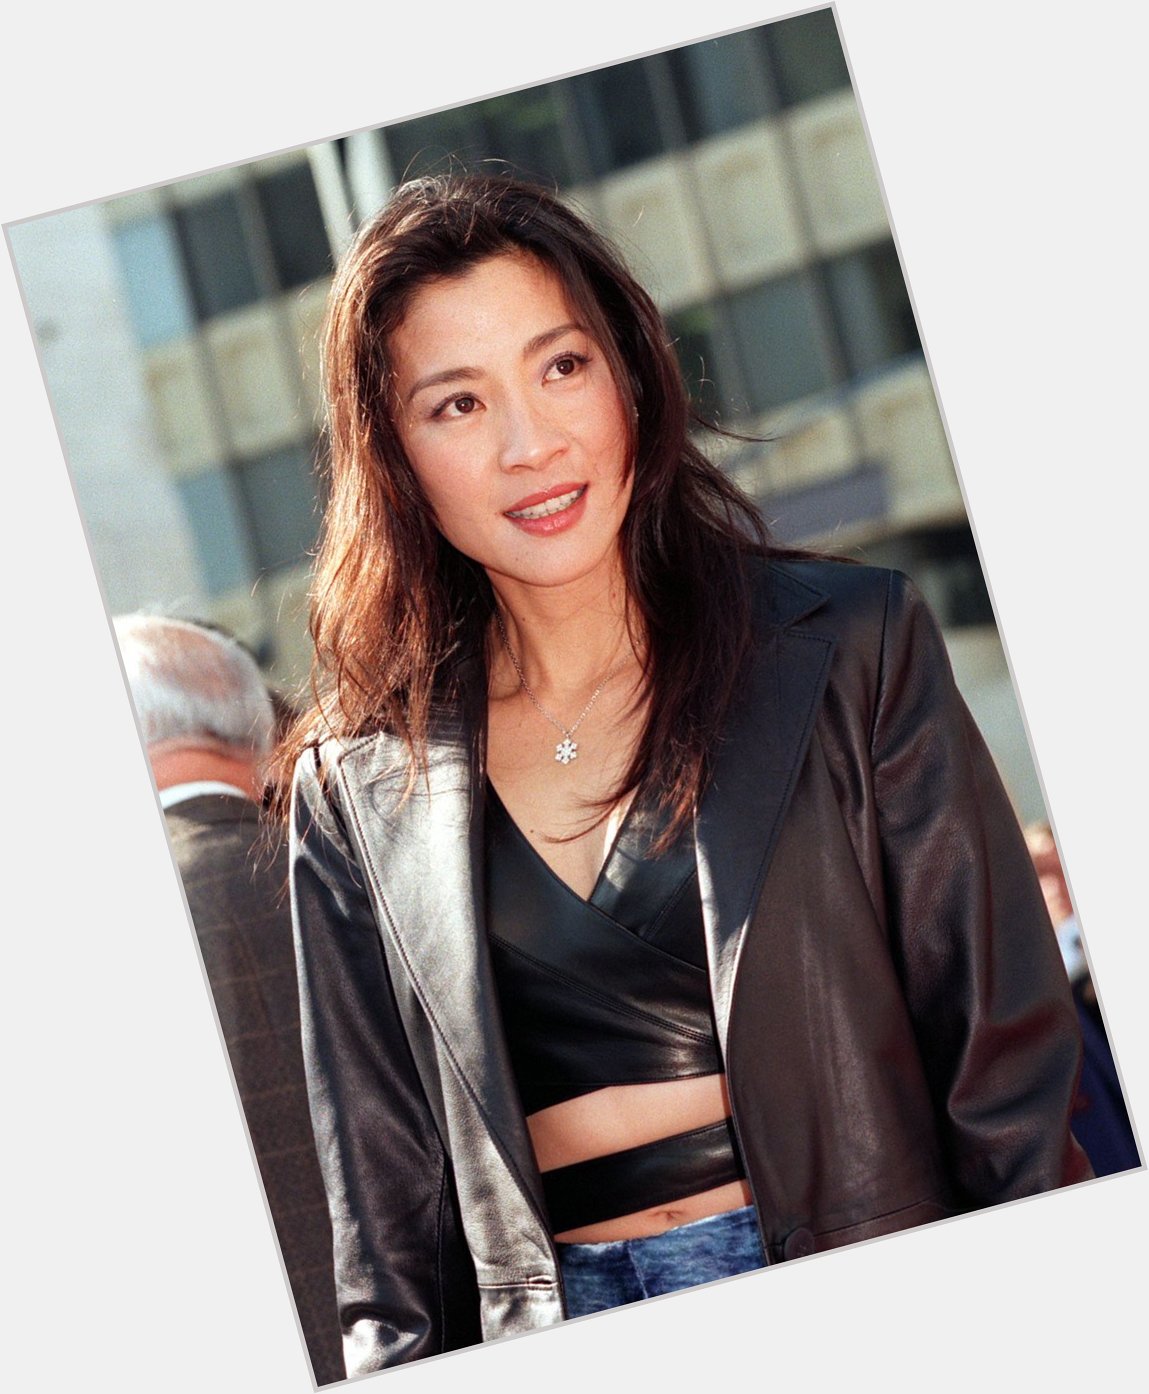 Happy birthday to the queen that is Michelle Yeoh! We hope her special day is as magical as her performances. 